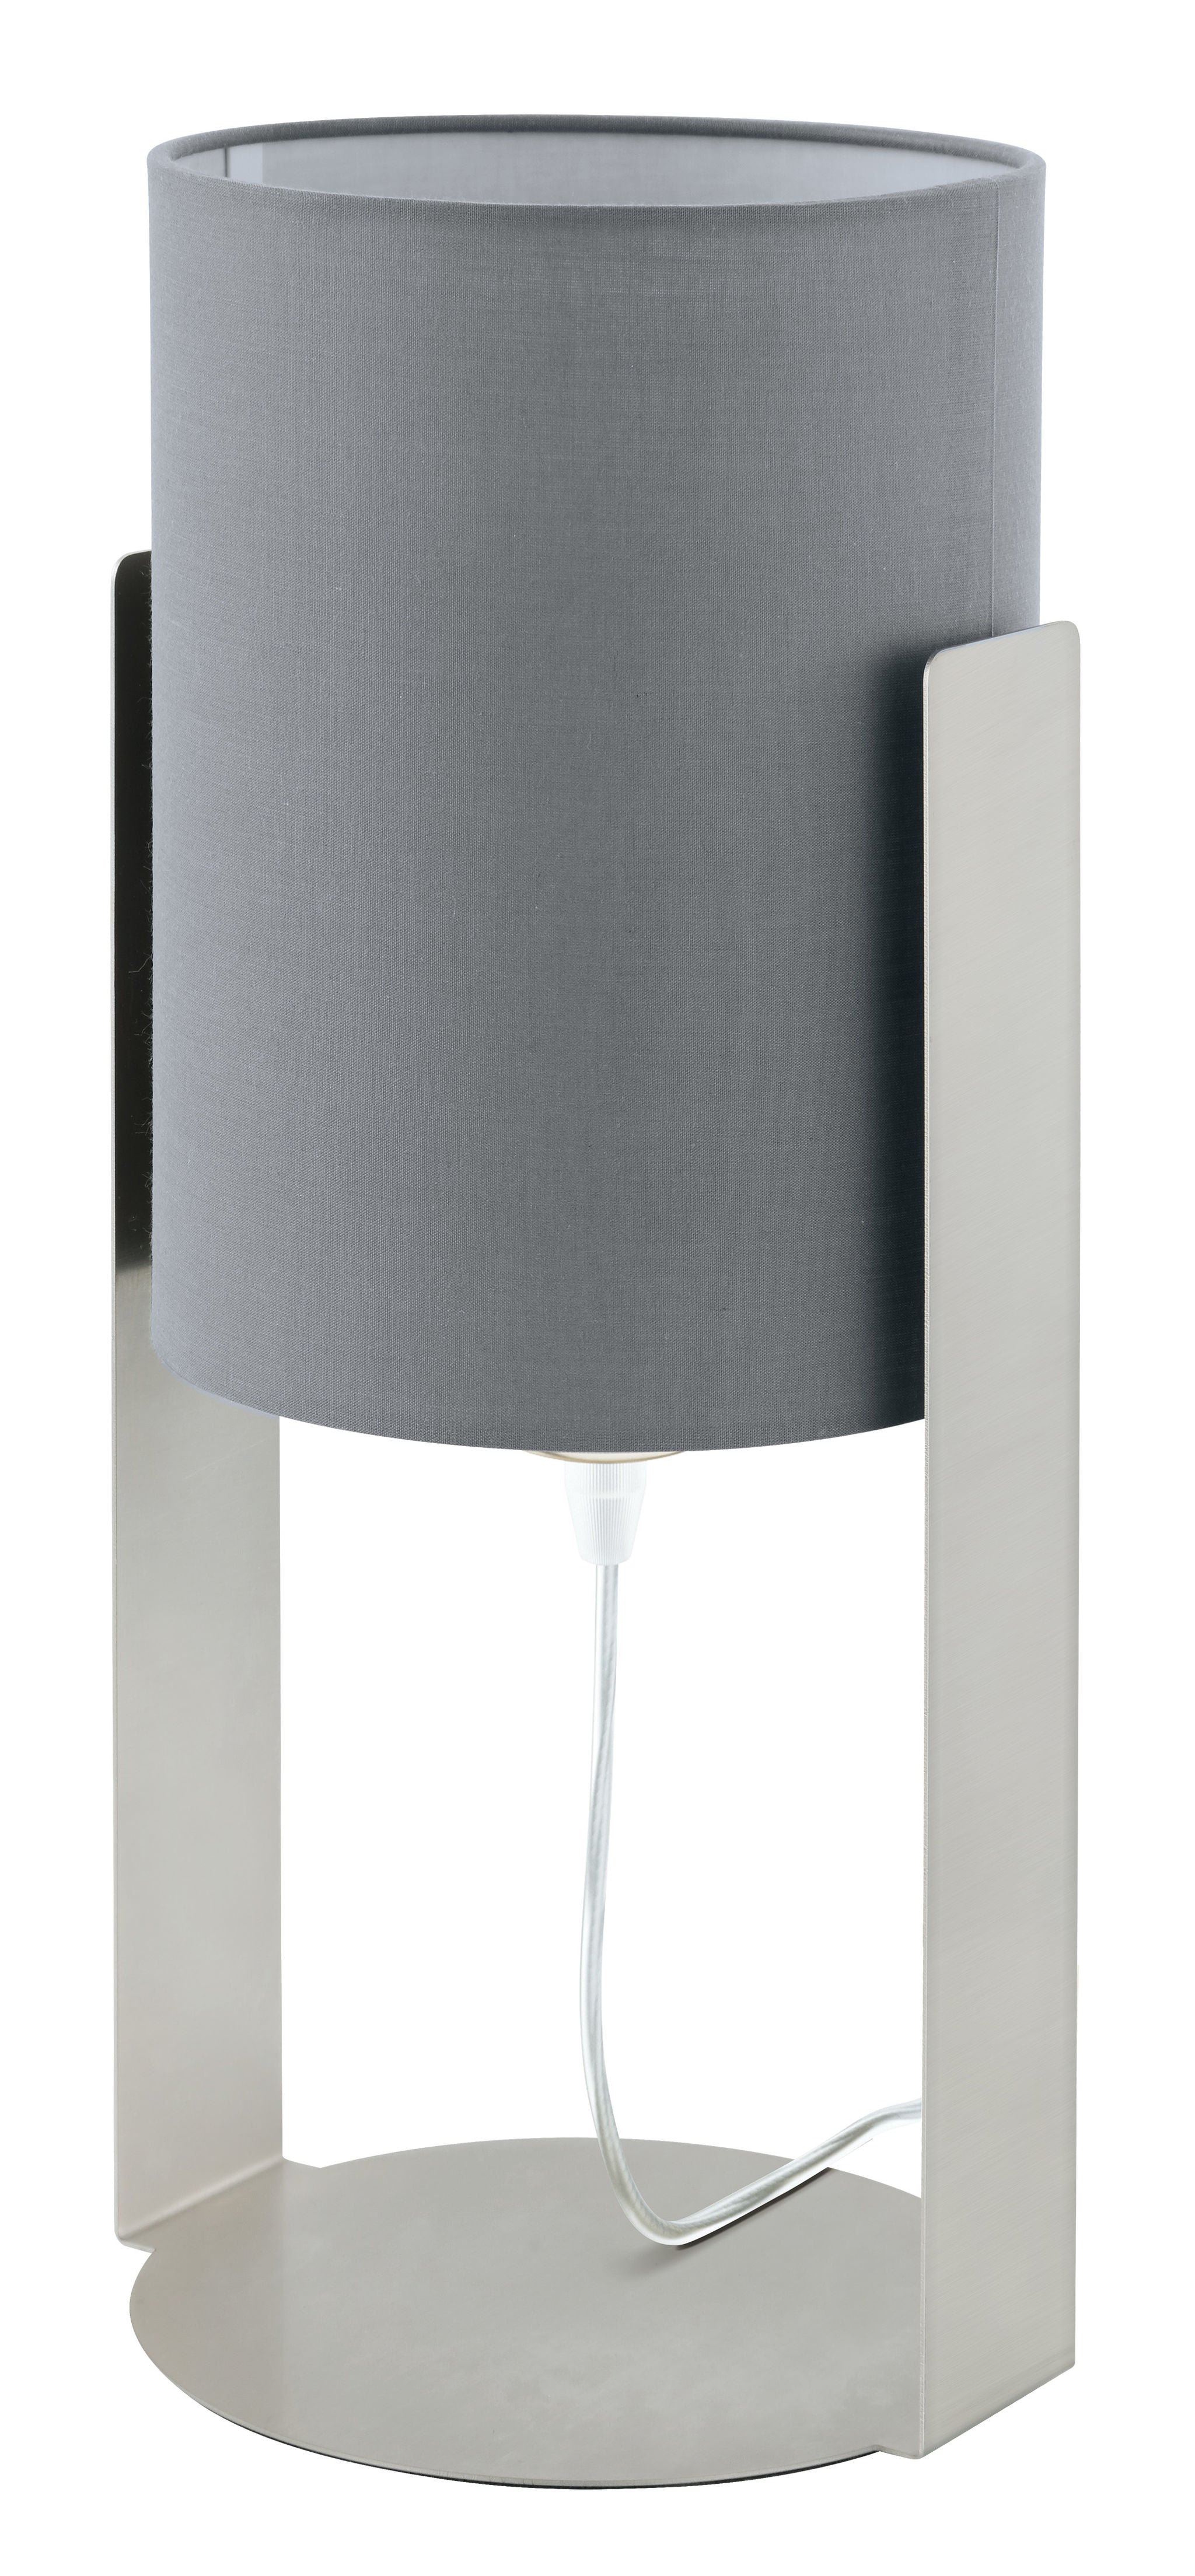 Siponto Table lamp Stainless steel - 98286A | EGLO